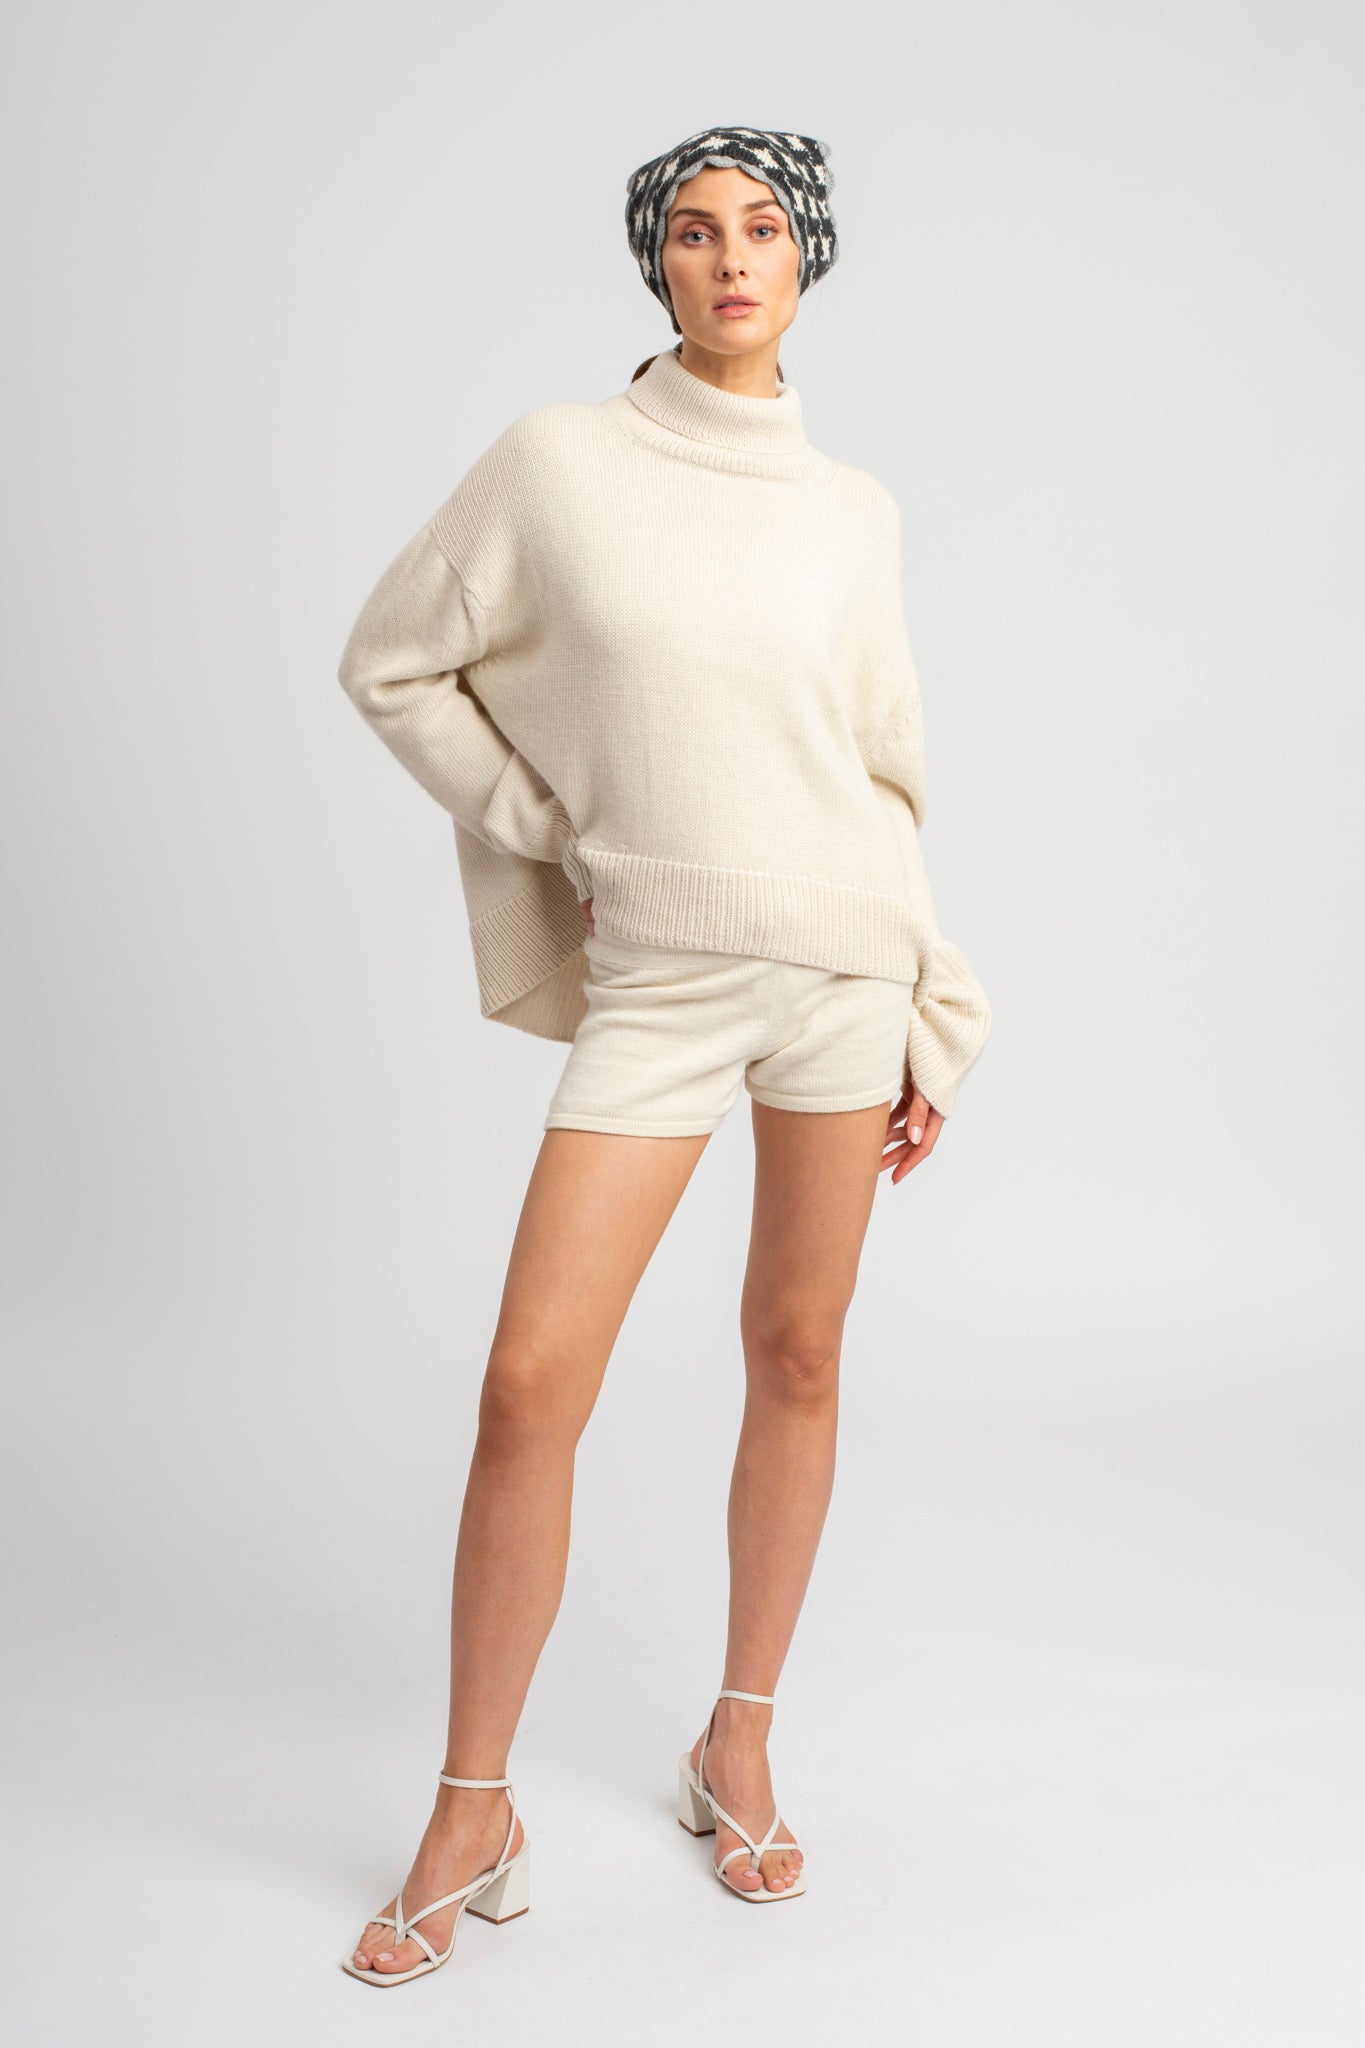 Model wearing turtleneck oversized sweater in white alpaca wool with headscarf, front standing